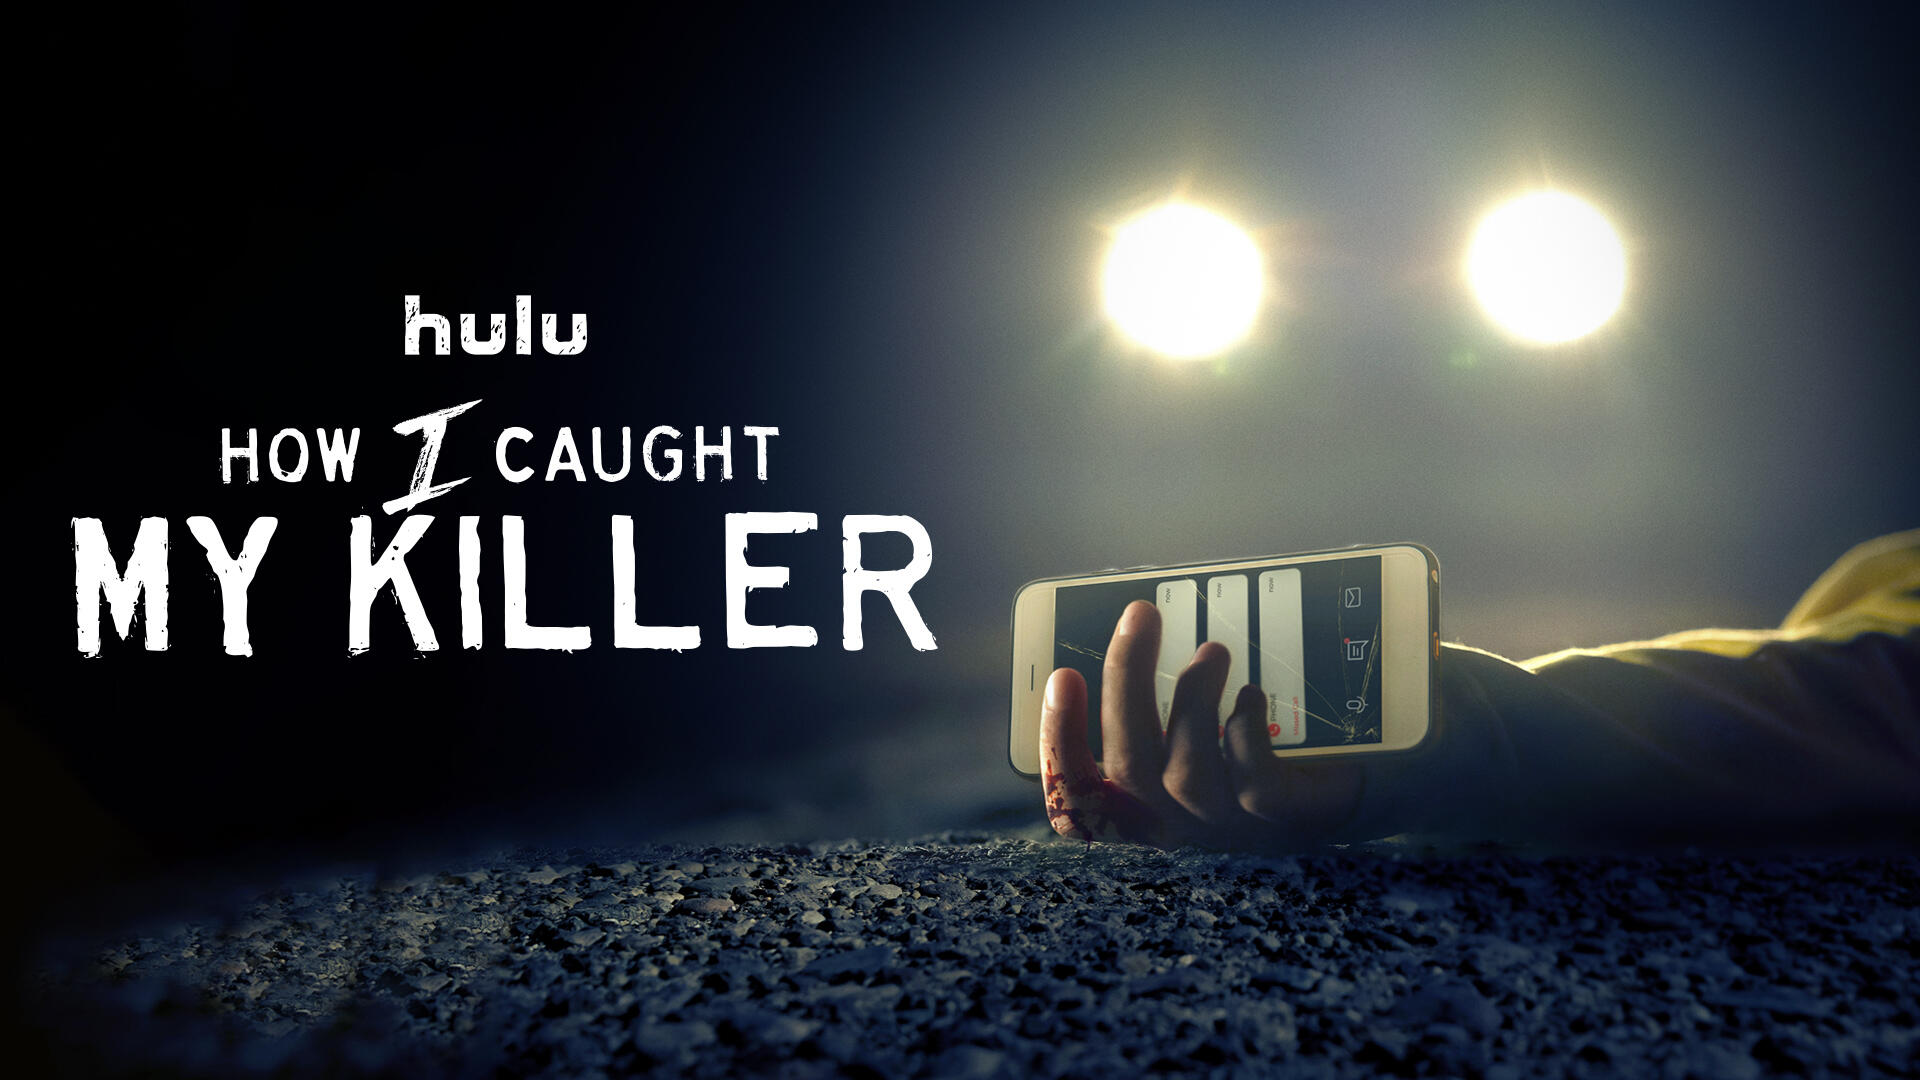 How I Caught My Killer -- Season 1 -- “How I Caught My Killer” is a true-crime docu-series that highlights the real-life stories behind unique homicide cases with in-depth interviews, authentic archival material and cinematic recreations all packaged together into a fresh spin in the genre. (Courtesy of Hulu)